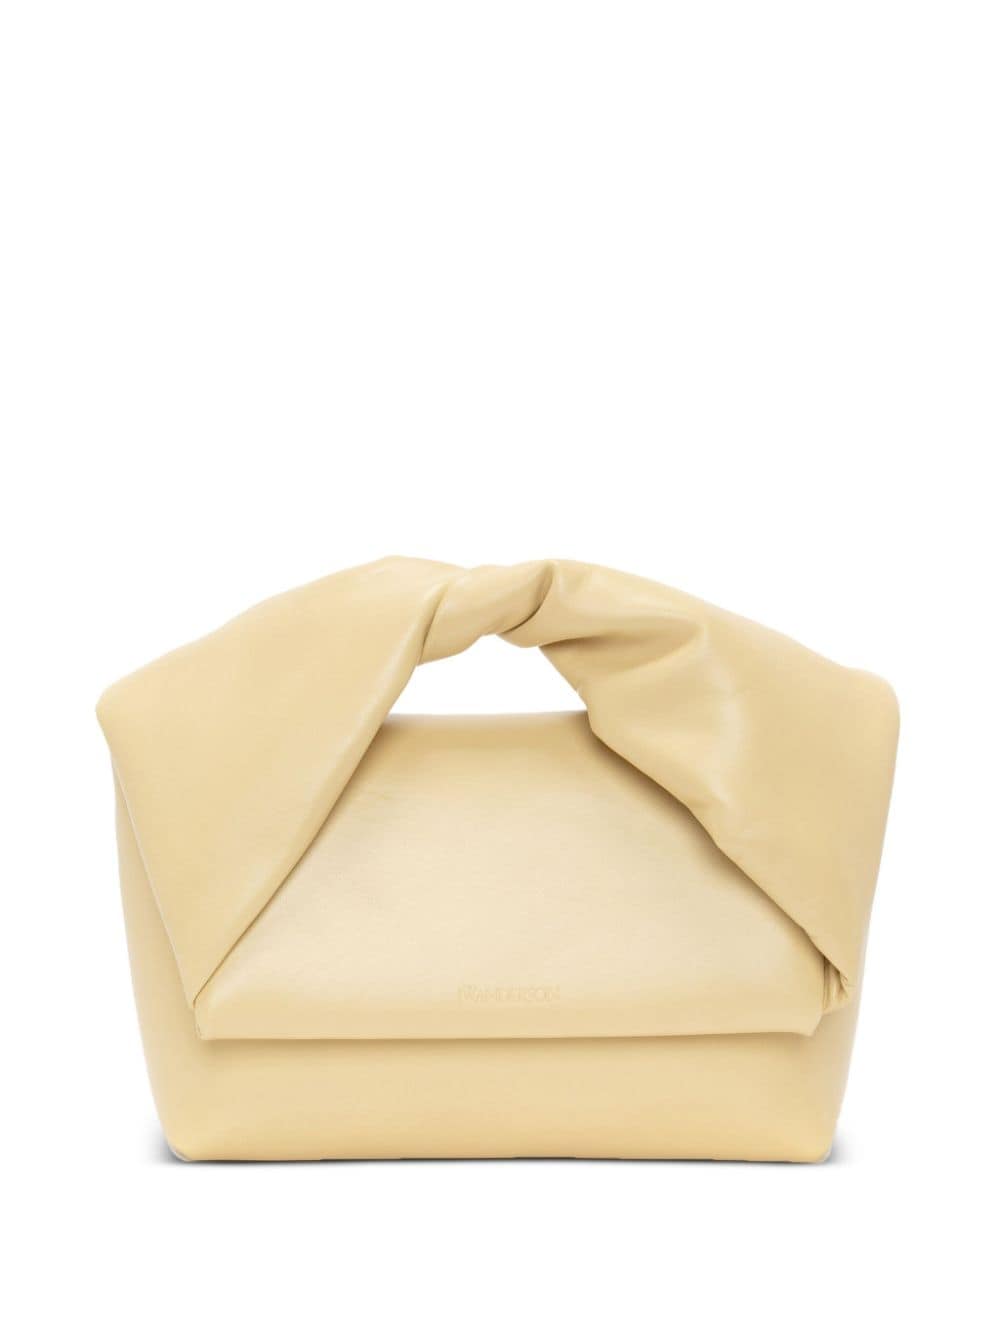 JW Anderson large Twister leather bag - Yellow